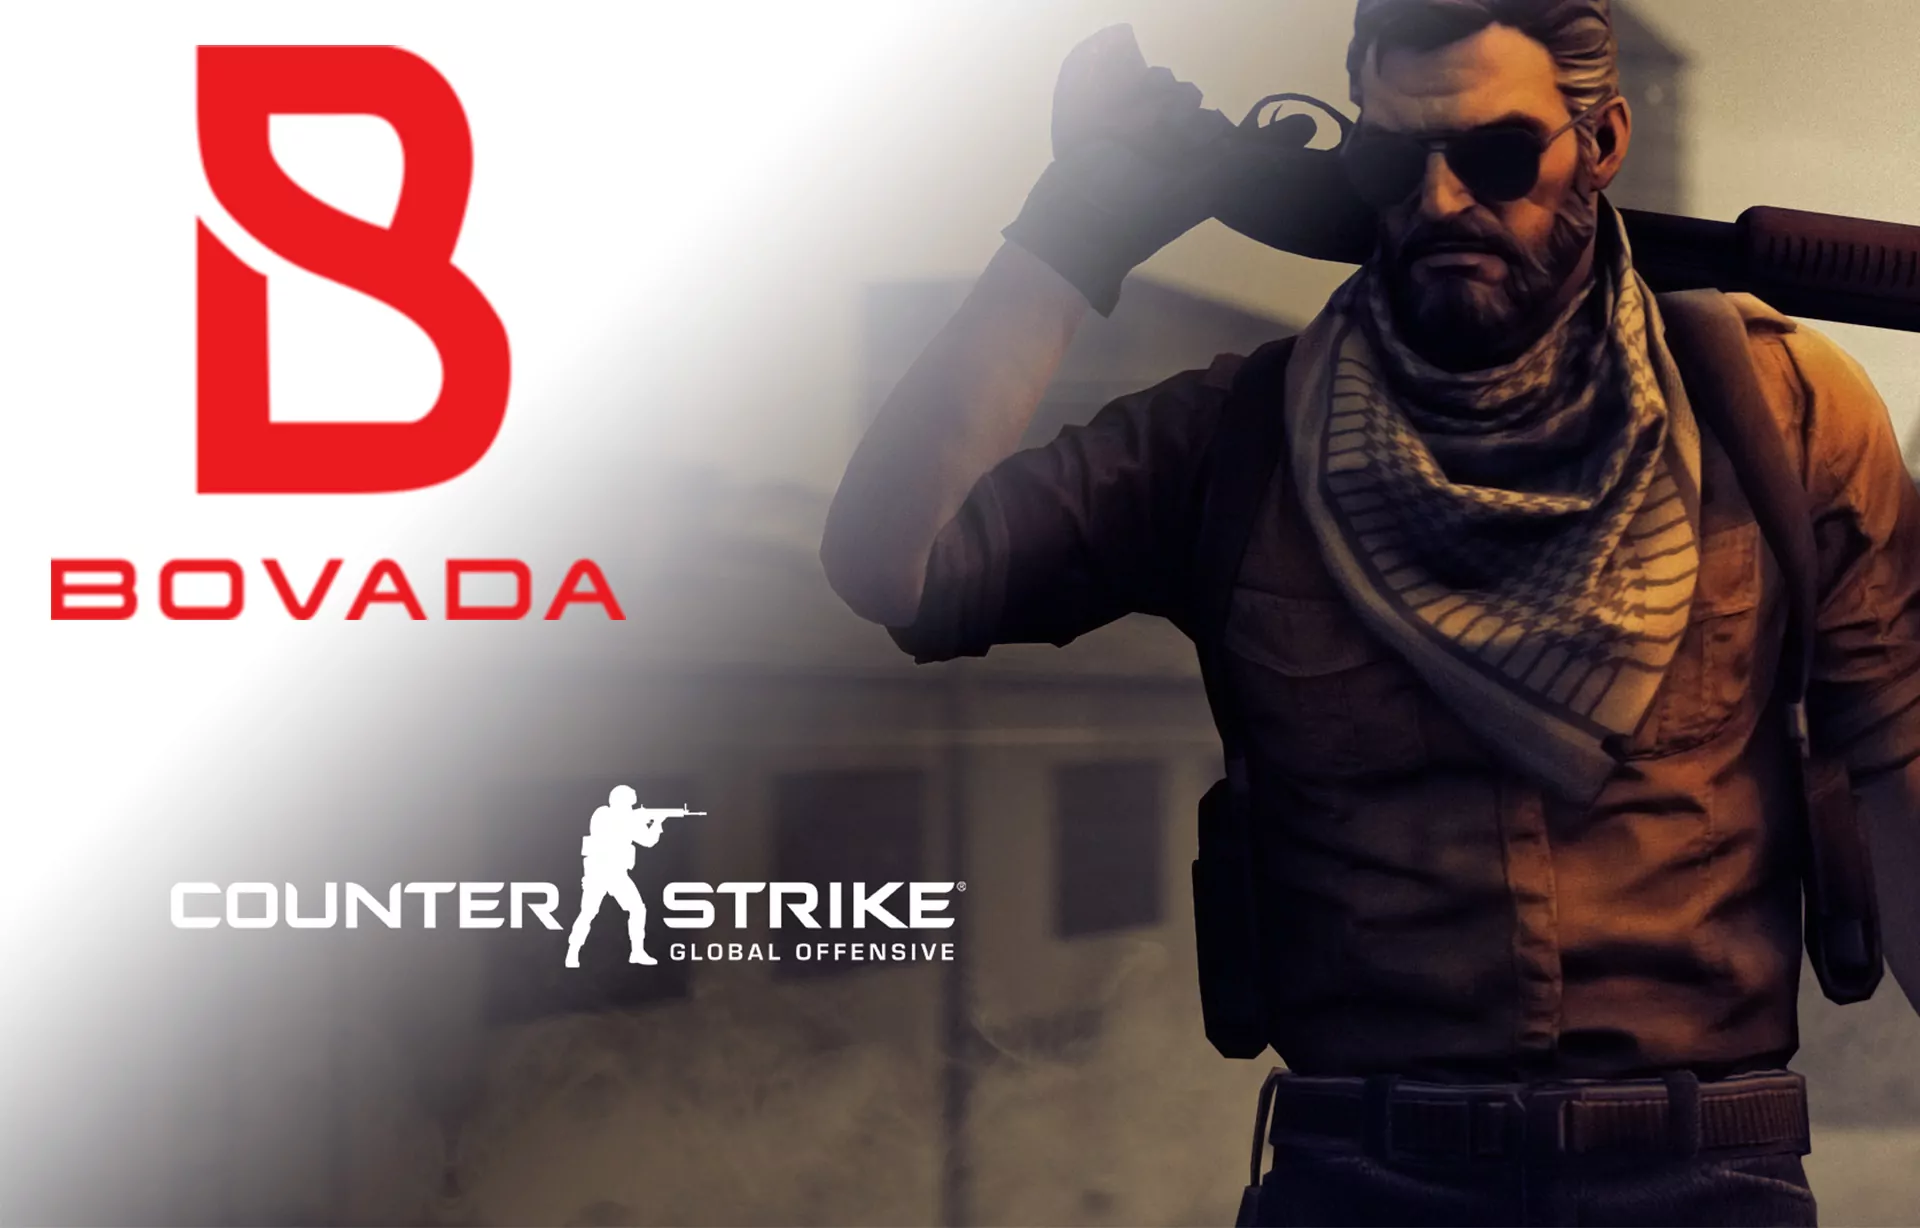 CS:GO betting section is available at Bovada online bookmaker.